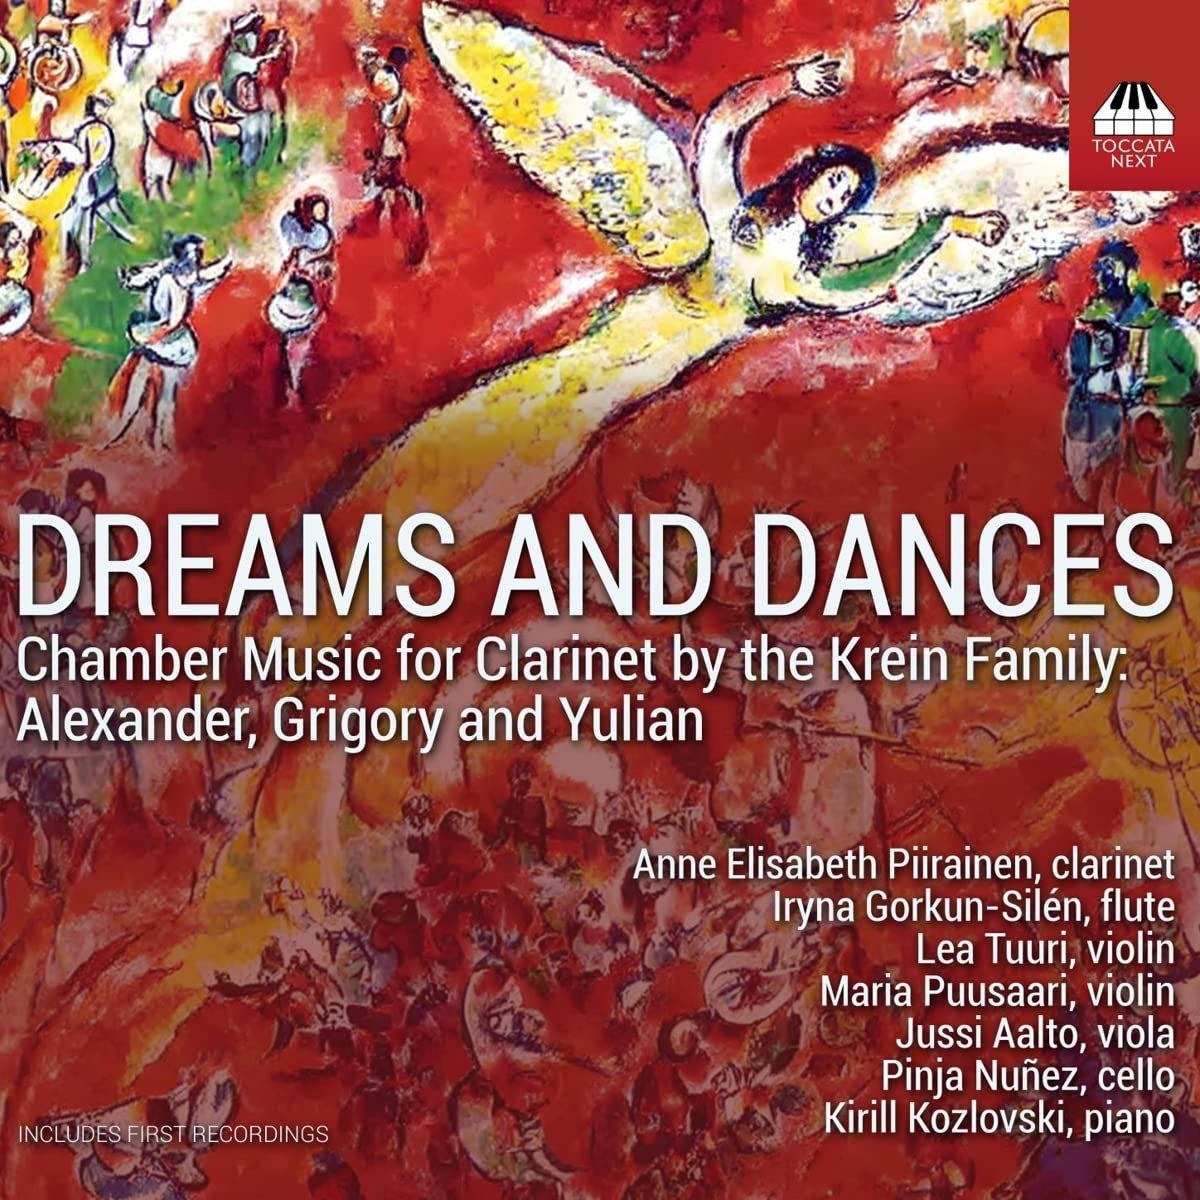 CD Shop - V/A DREAMS AND DANCES: CHAMBER MUSIC FOR THE CLARINET BY THE KREIN FAMILY